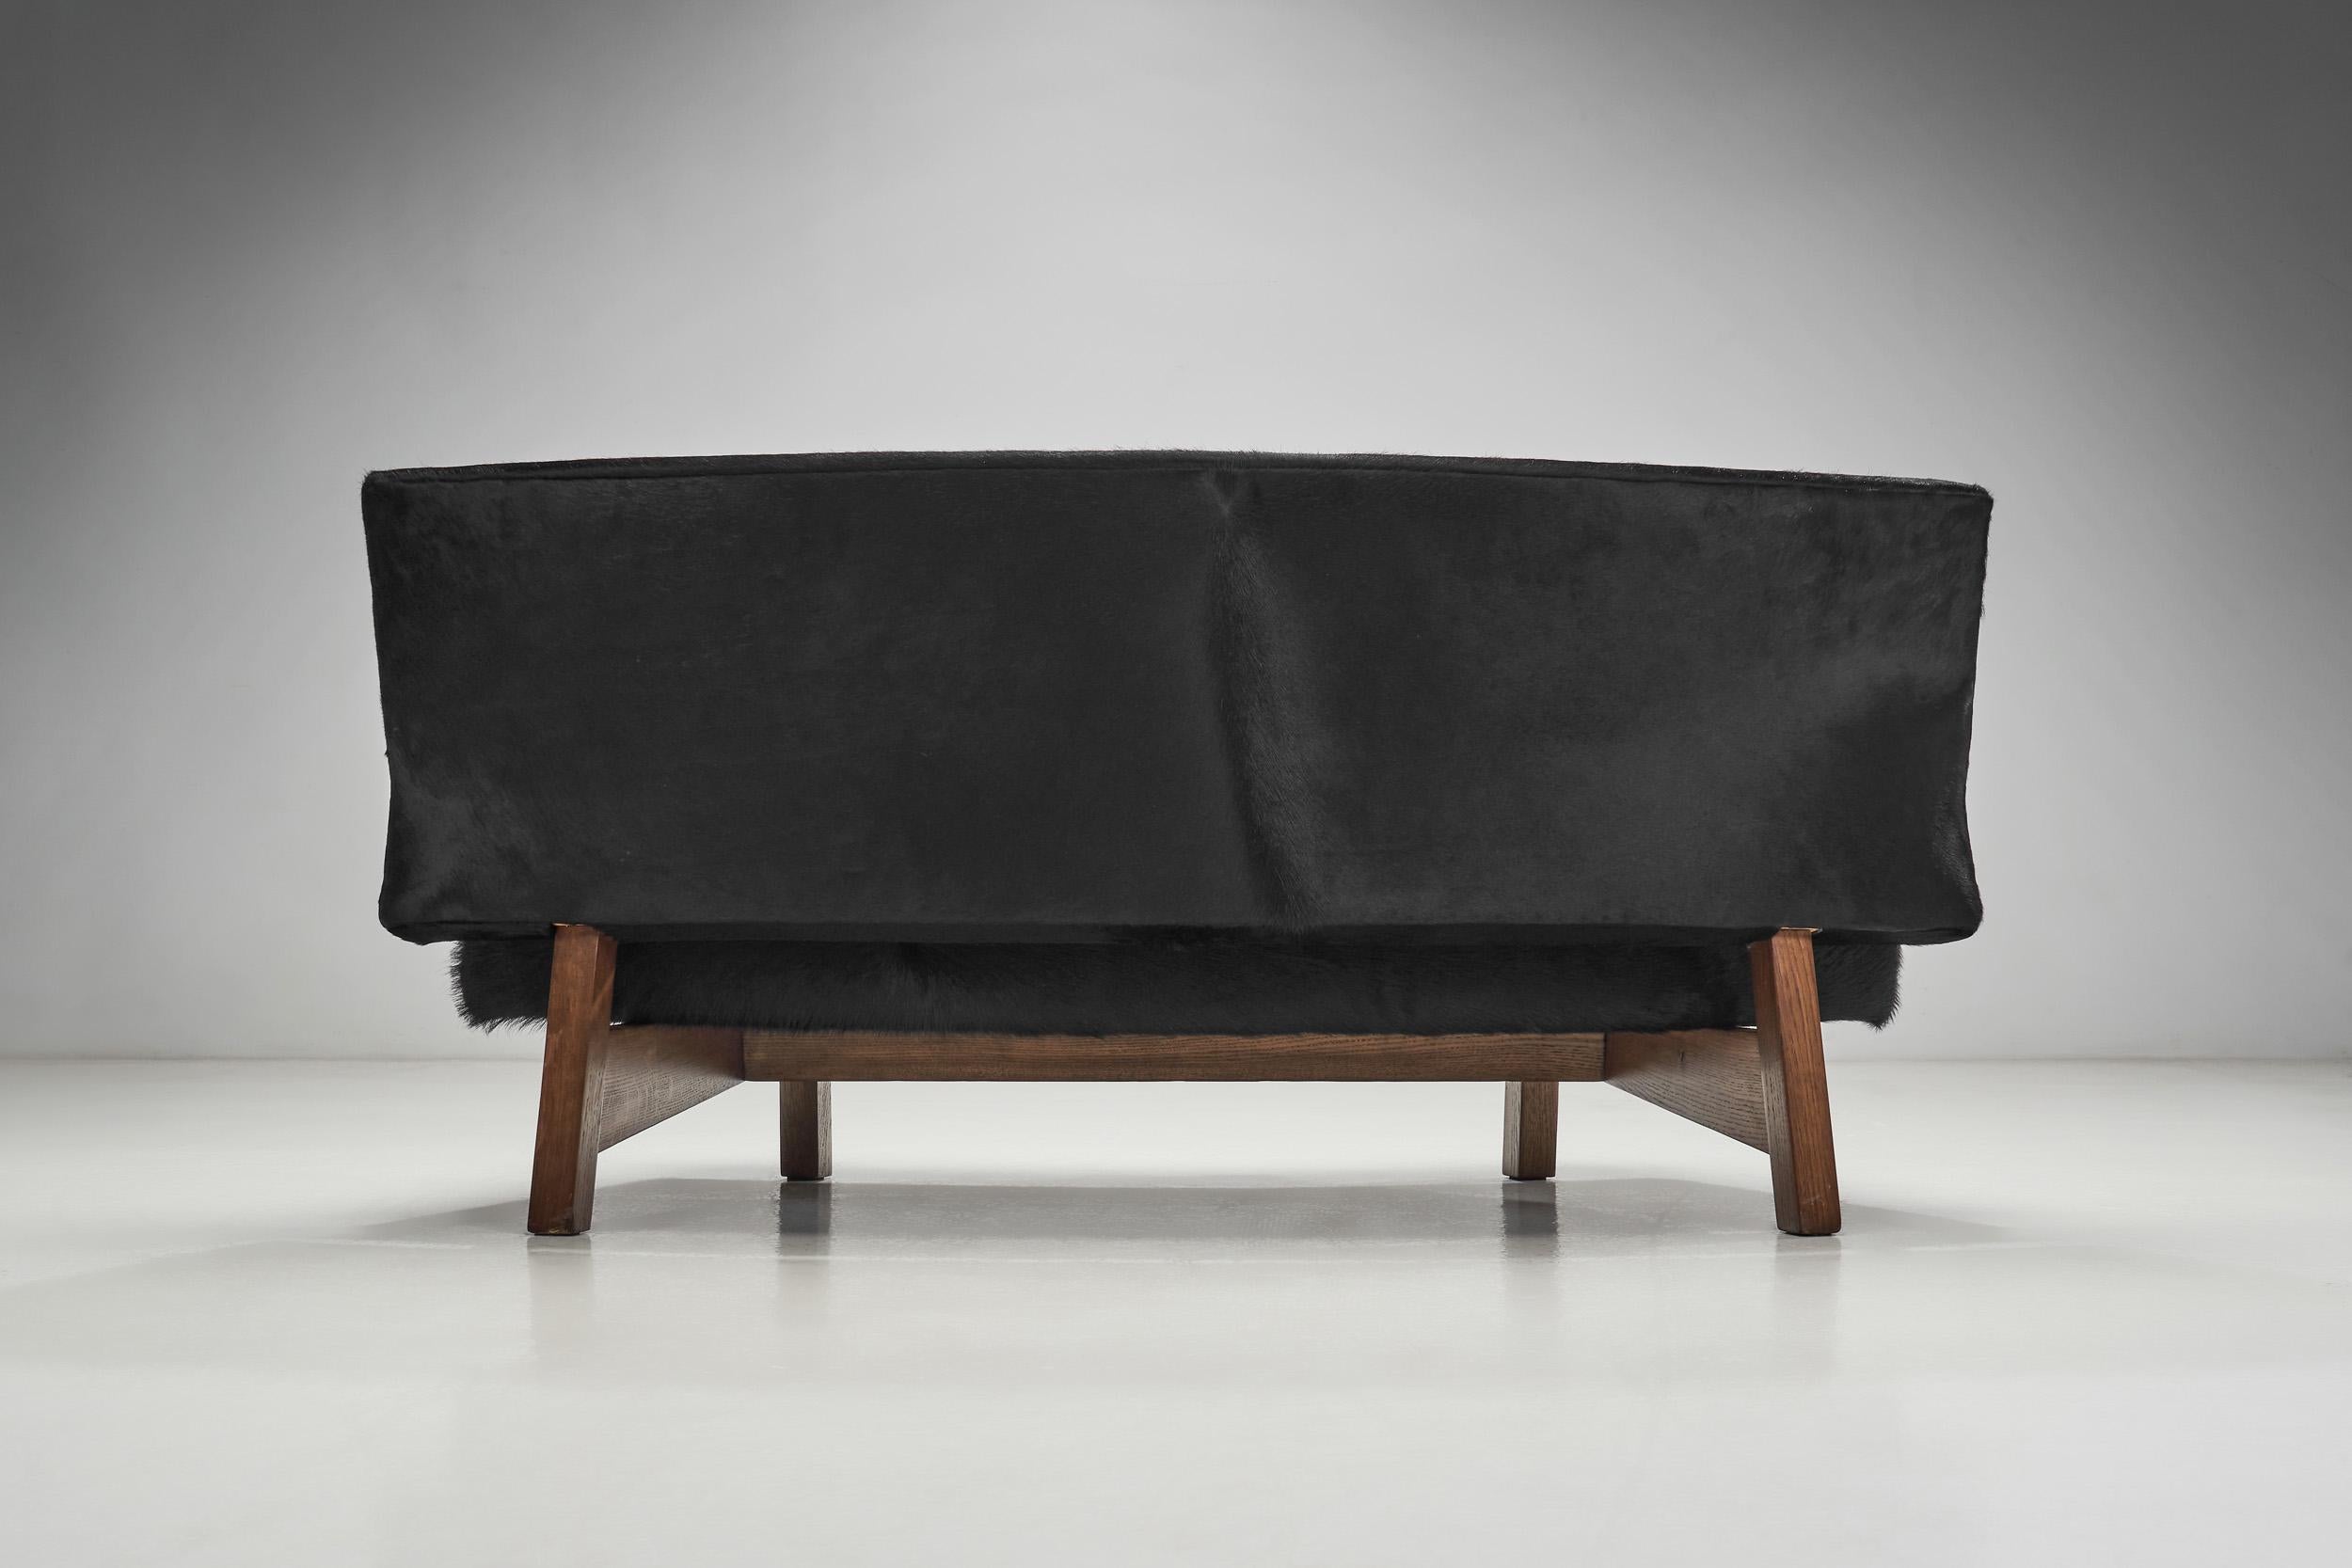 European Mid-Century Two Part Sofa in Black Cow Hide, Europe Ca 1950s For Sale 5